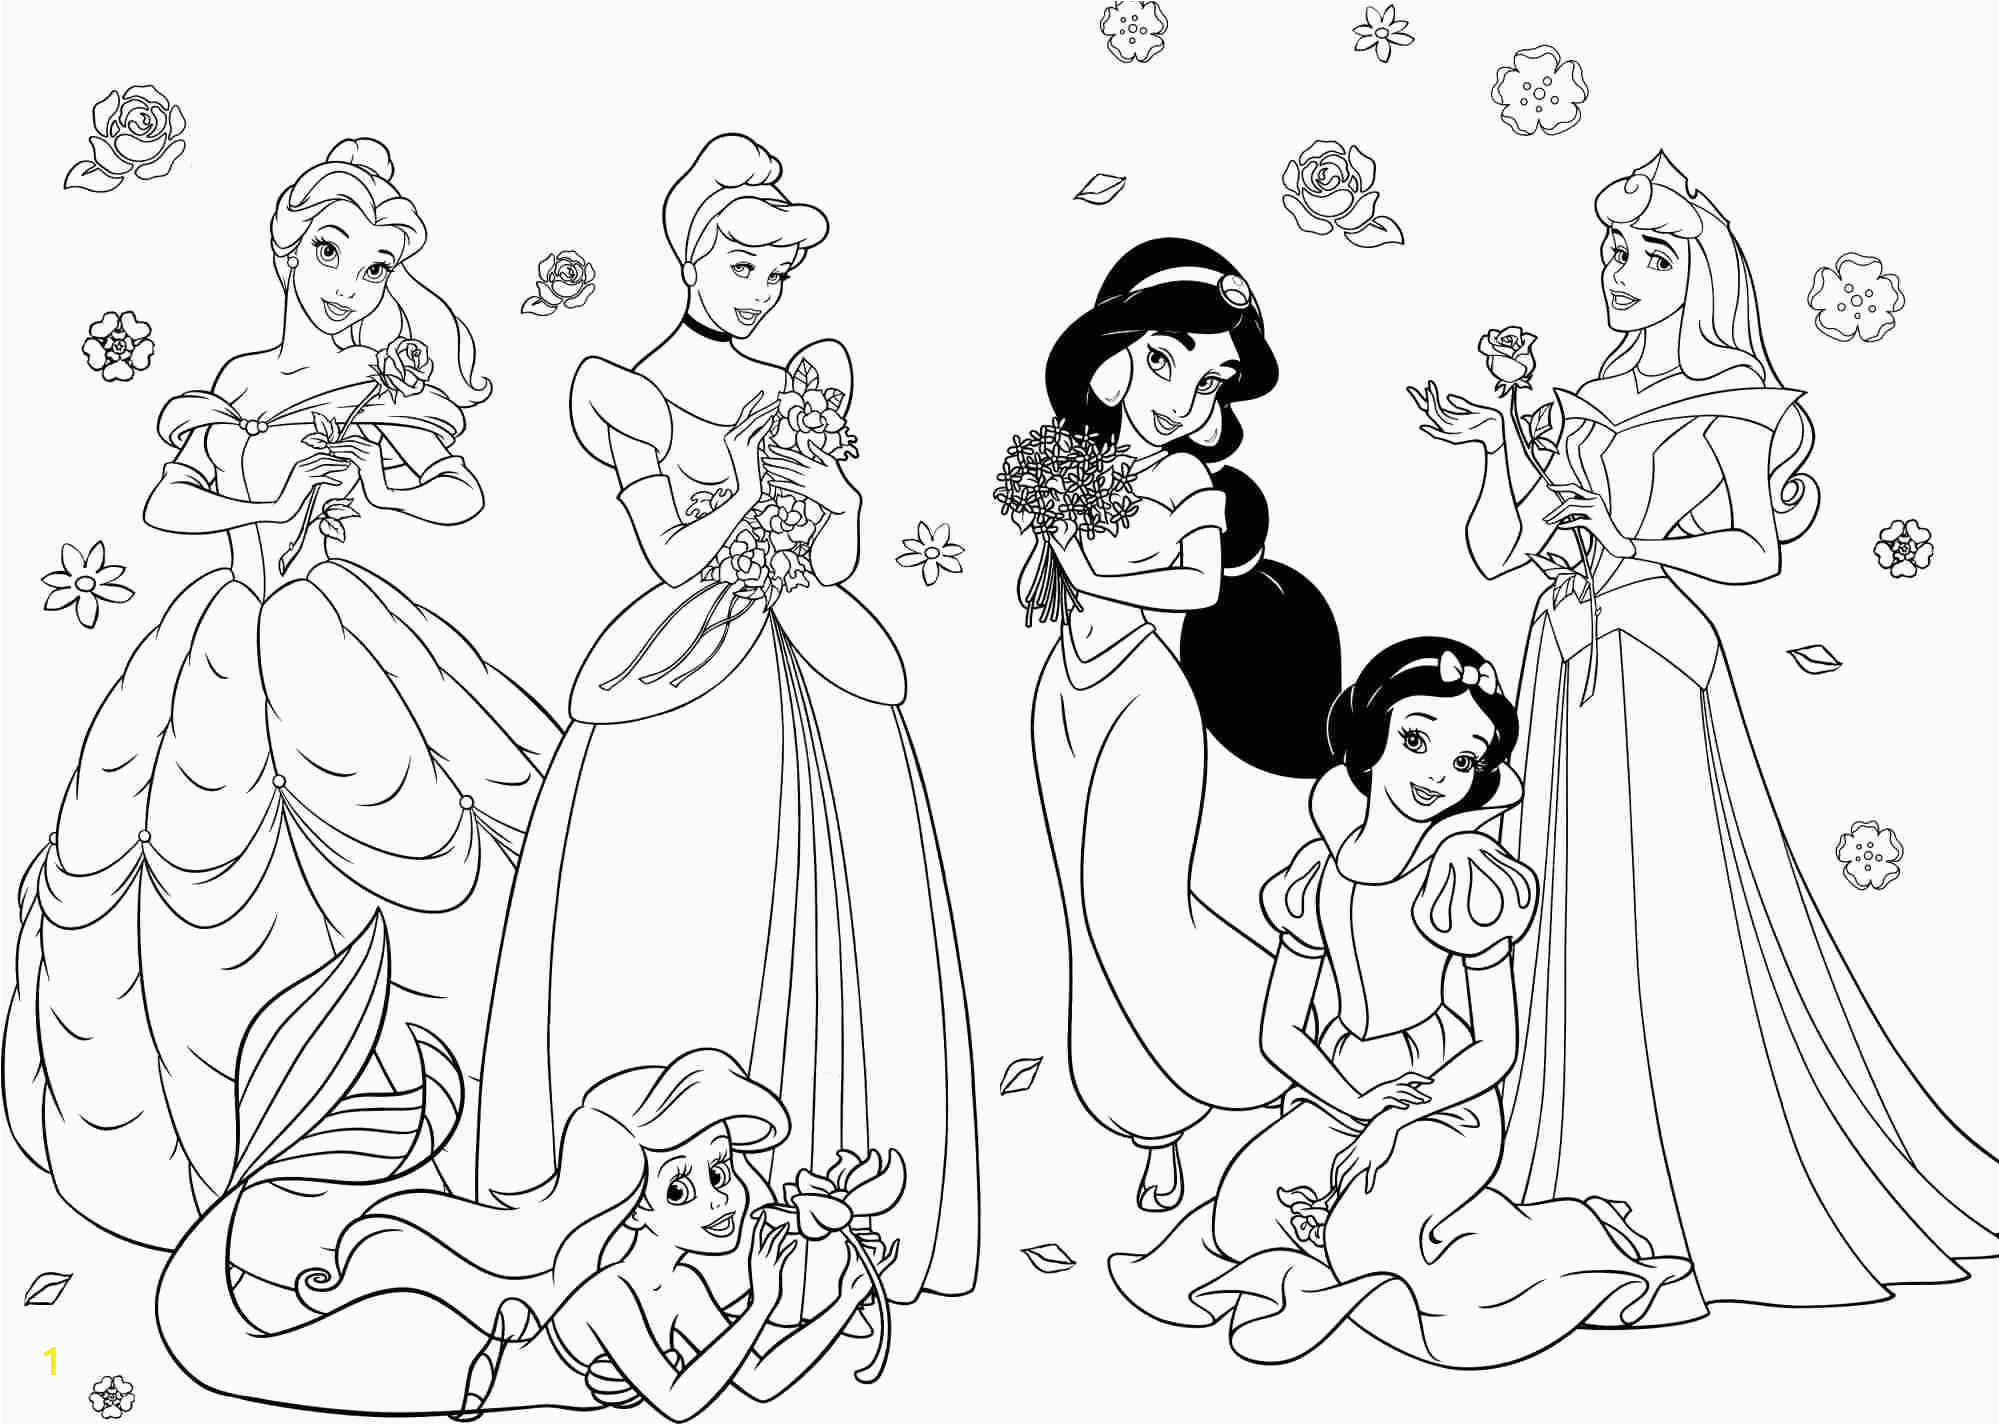 Disney Princess Black and White Coloring Pages Tree Girl Coloring In 2020 with Images